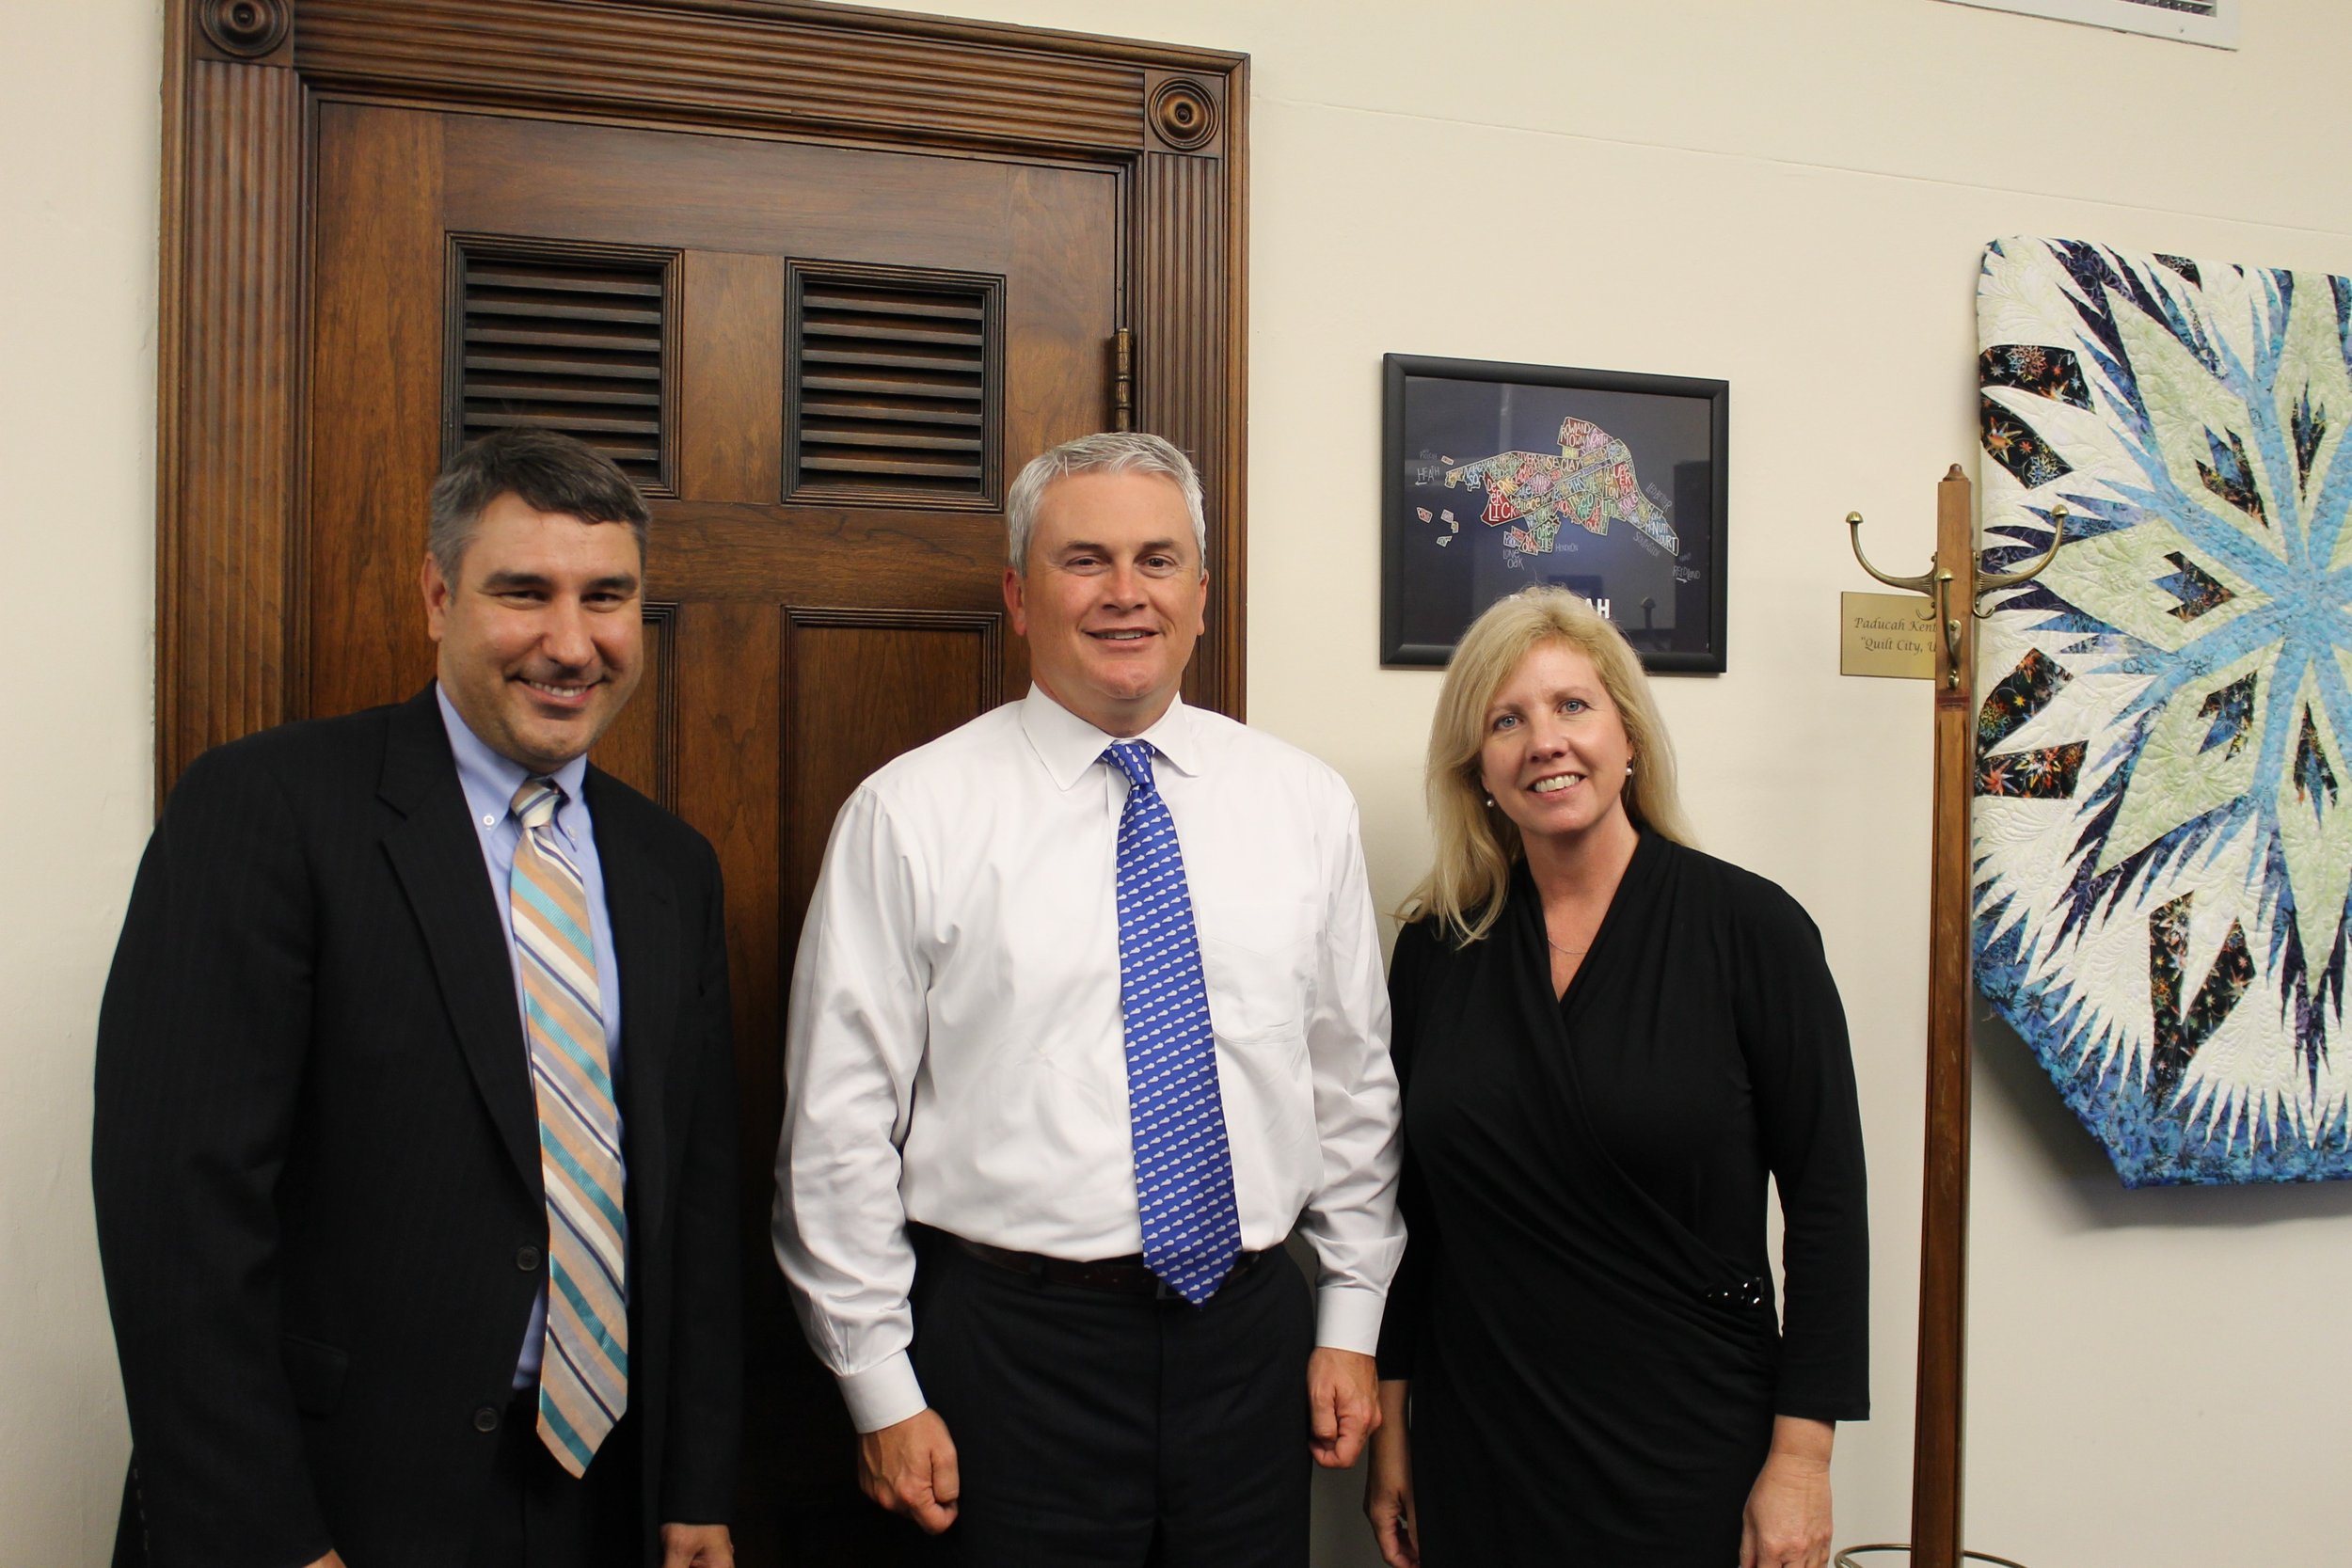 Kentucky Corn Growers Applauds Congressman Comer for his Commitment to Remove Barriers to Ethanol